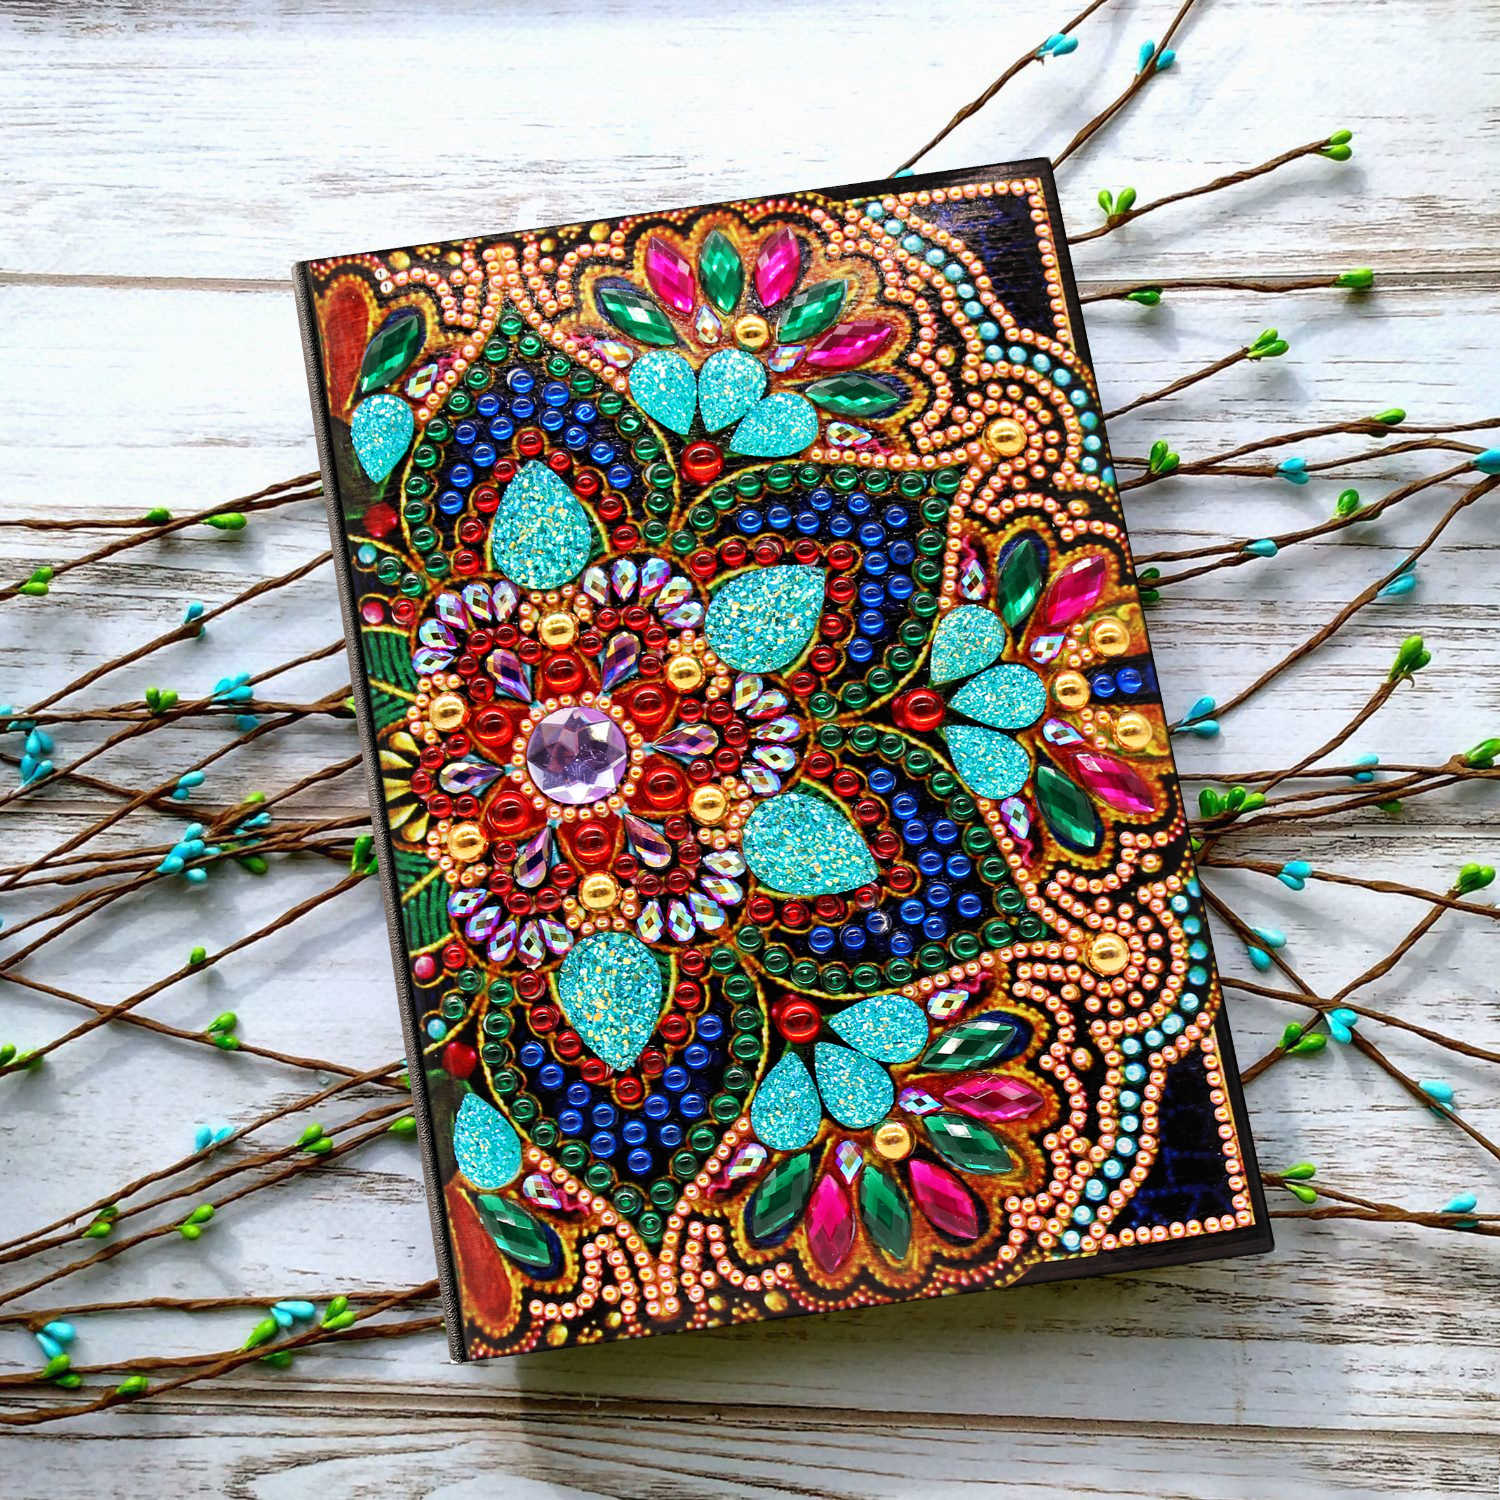 AZQSD Diamond Painting Mosaic Notebook Special Shaped Flower Mandala Patterns A5 Diary Book Embroidery Gift DIY